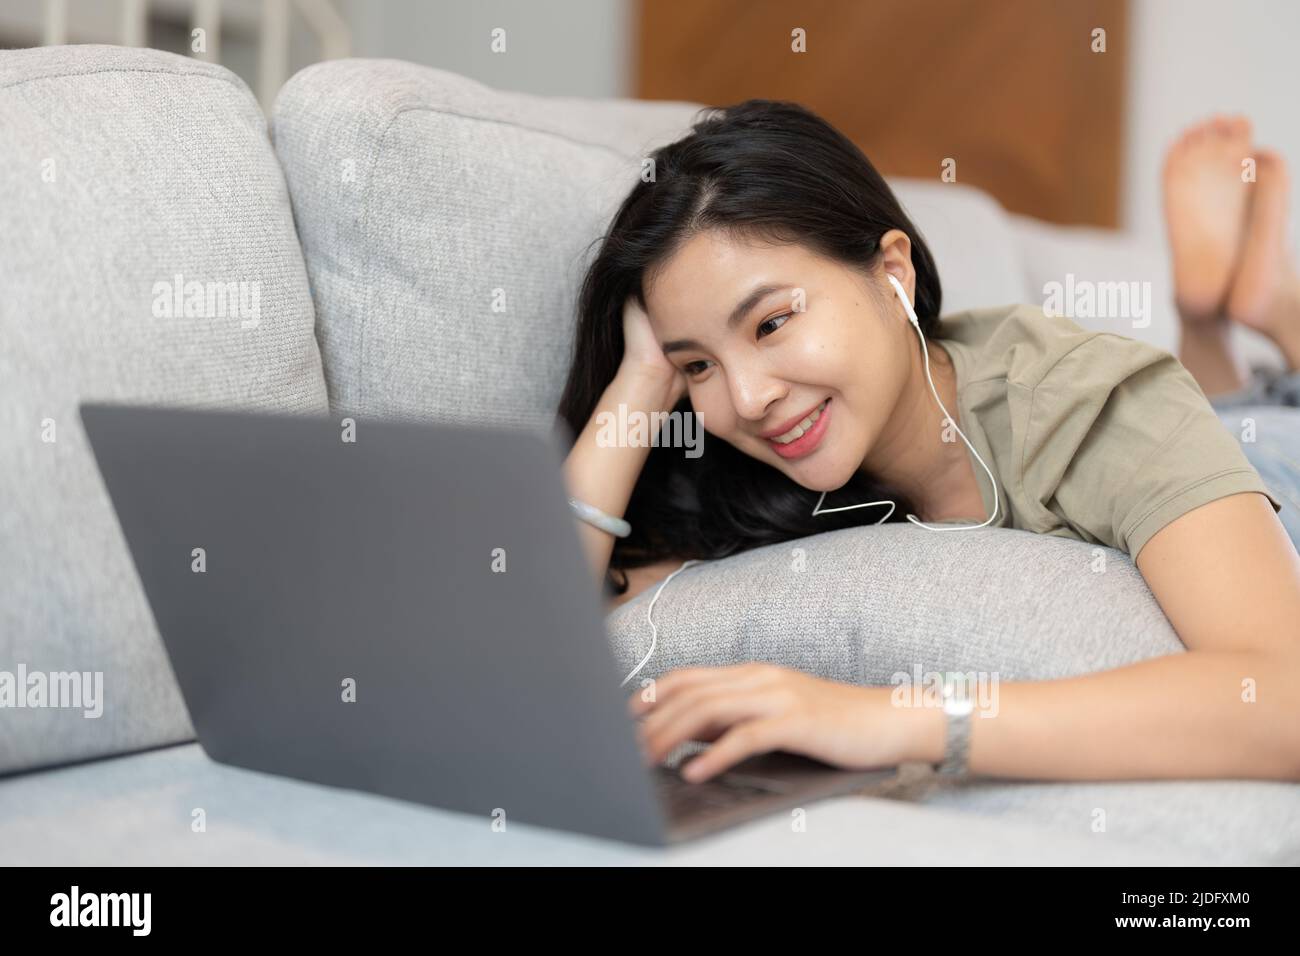 Relaxed woman using laptop in living room, enjoying working, internet shopping, checking social network, reading news or communicating online with Stock Photo